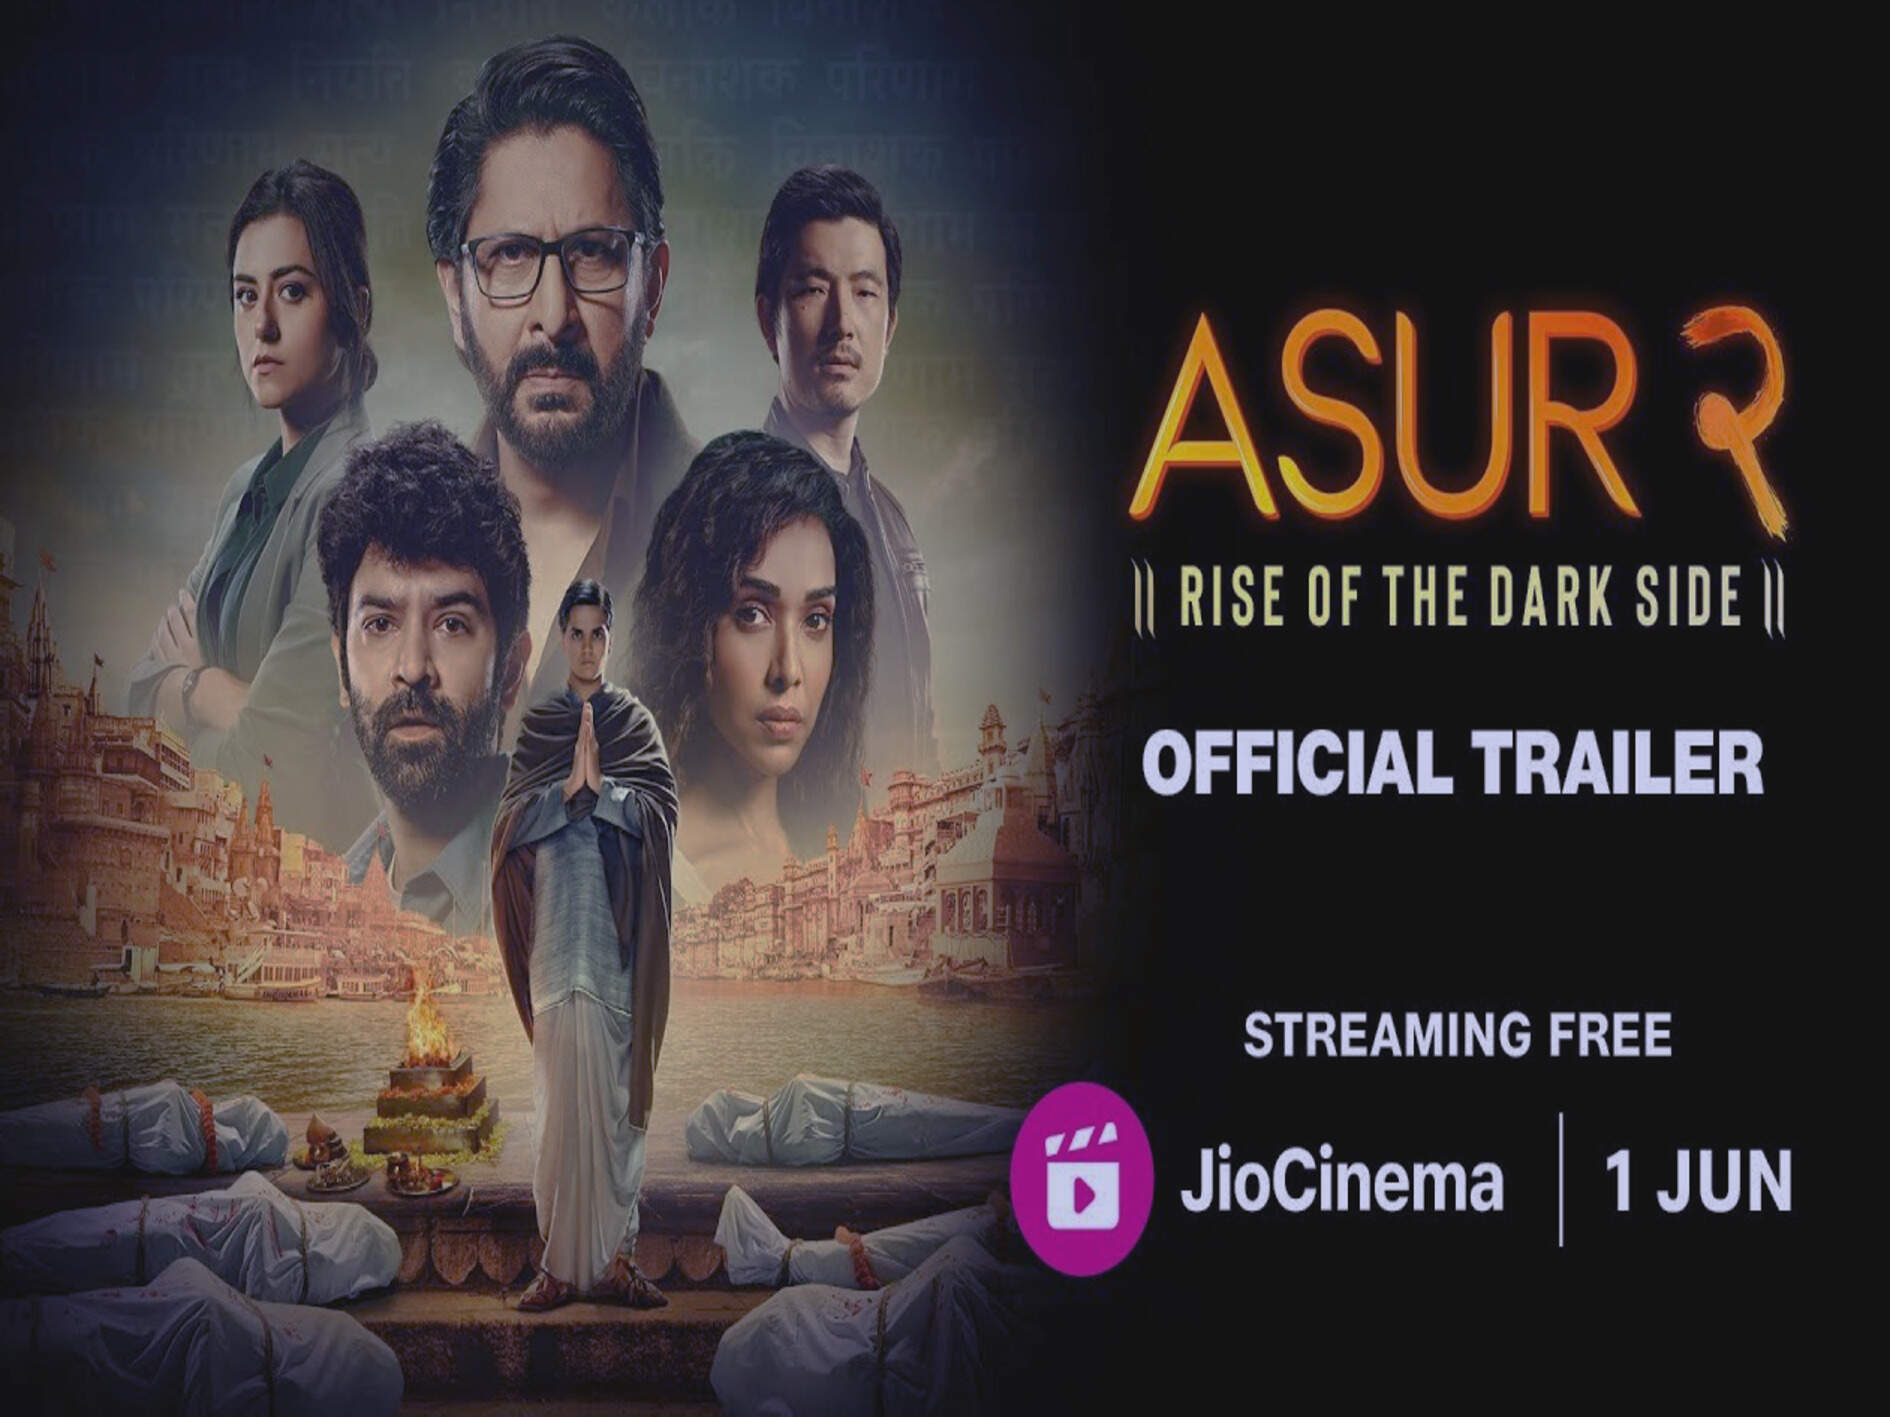 "Asur Season 2: A Gripping Thriller That Explores the Minds of Serial Killers"